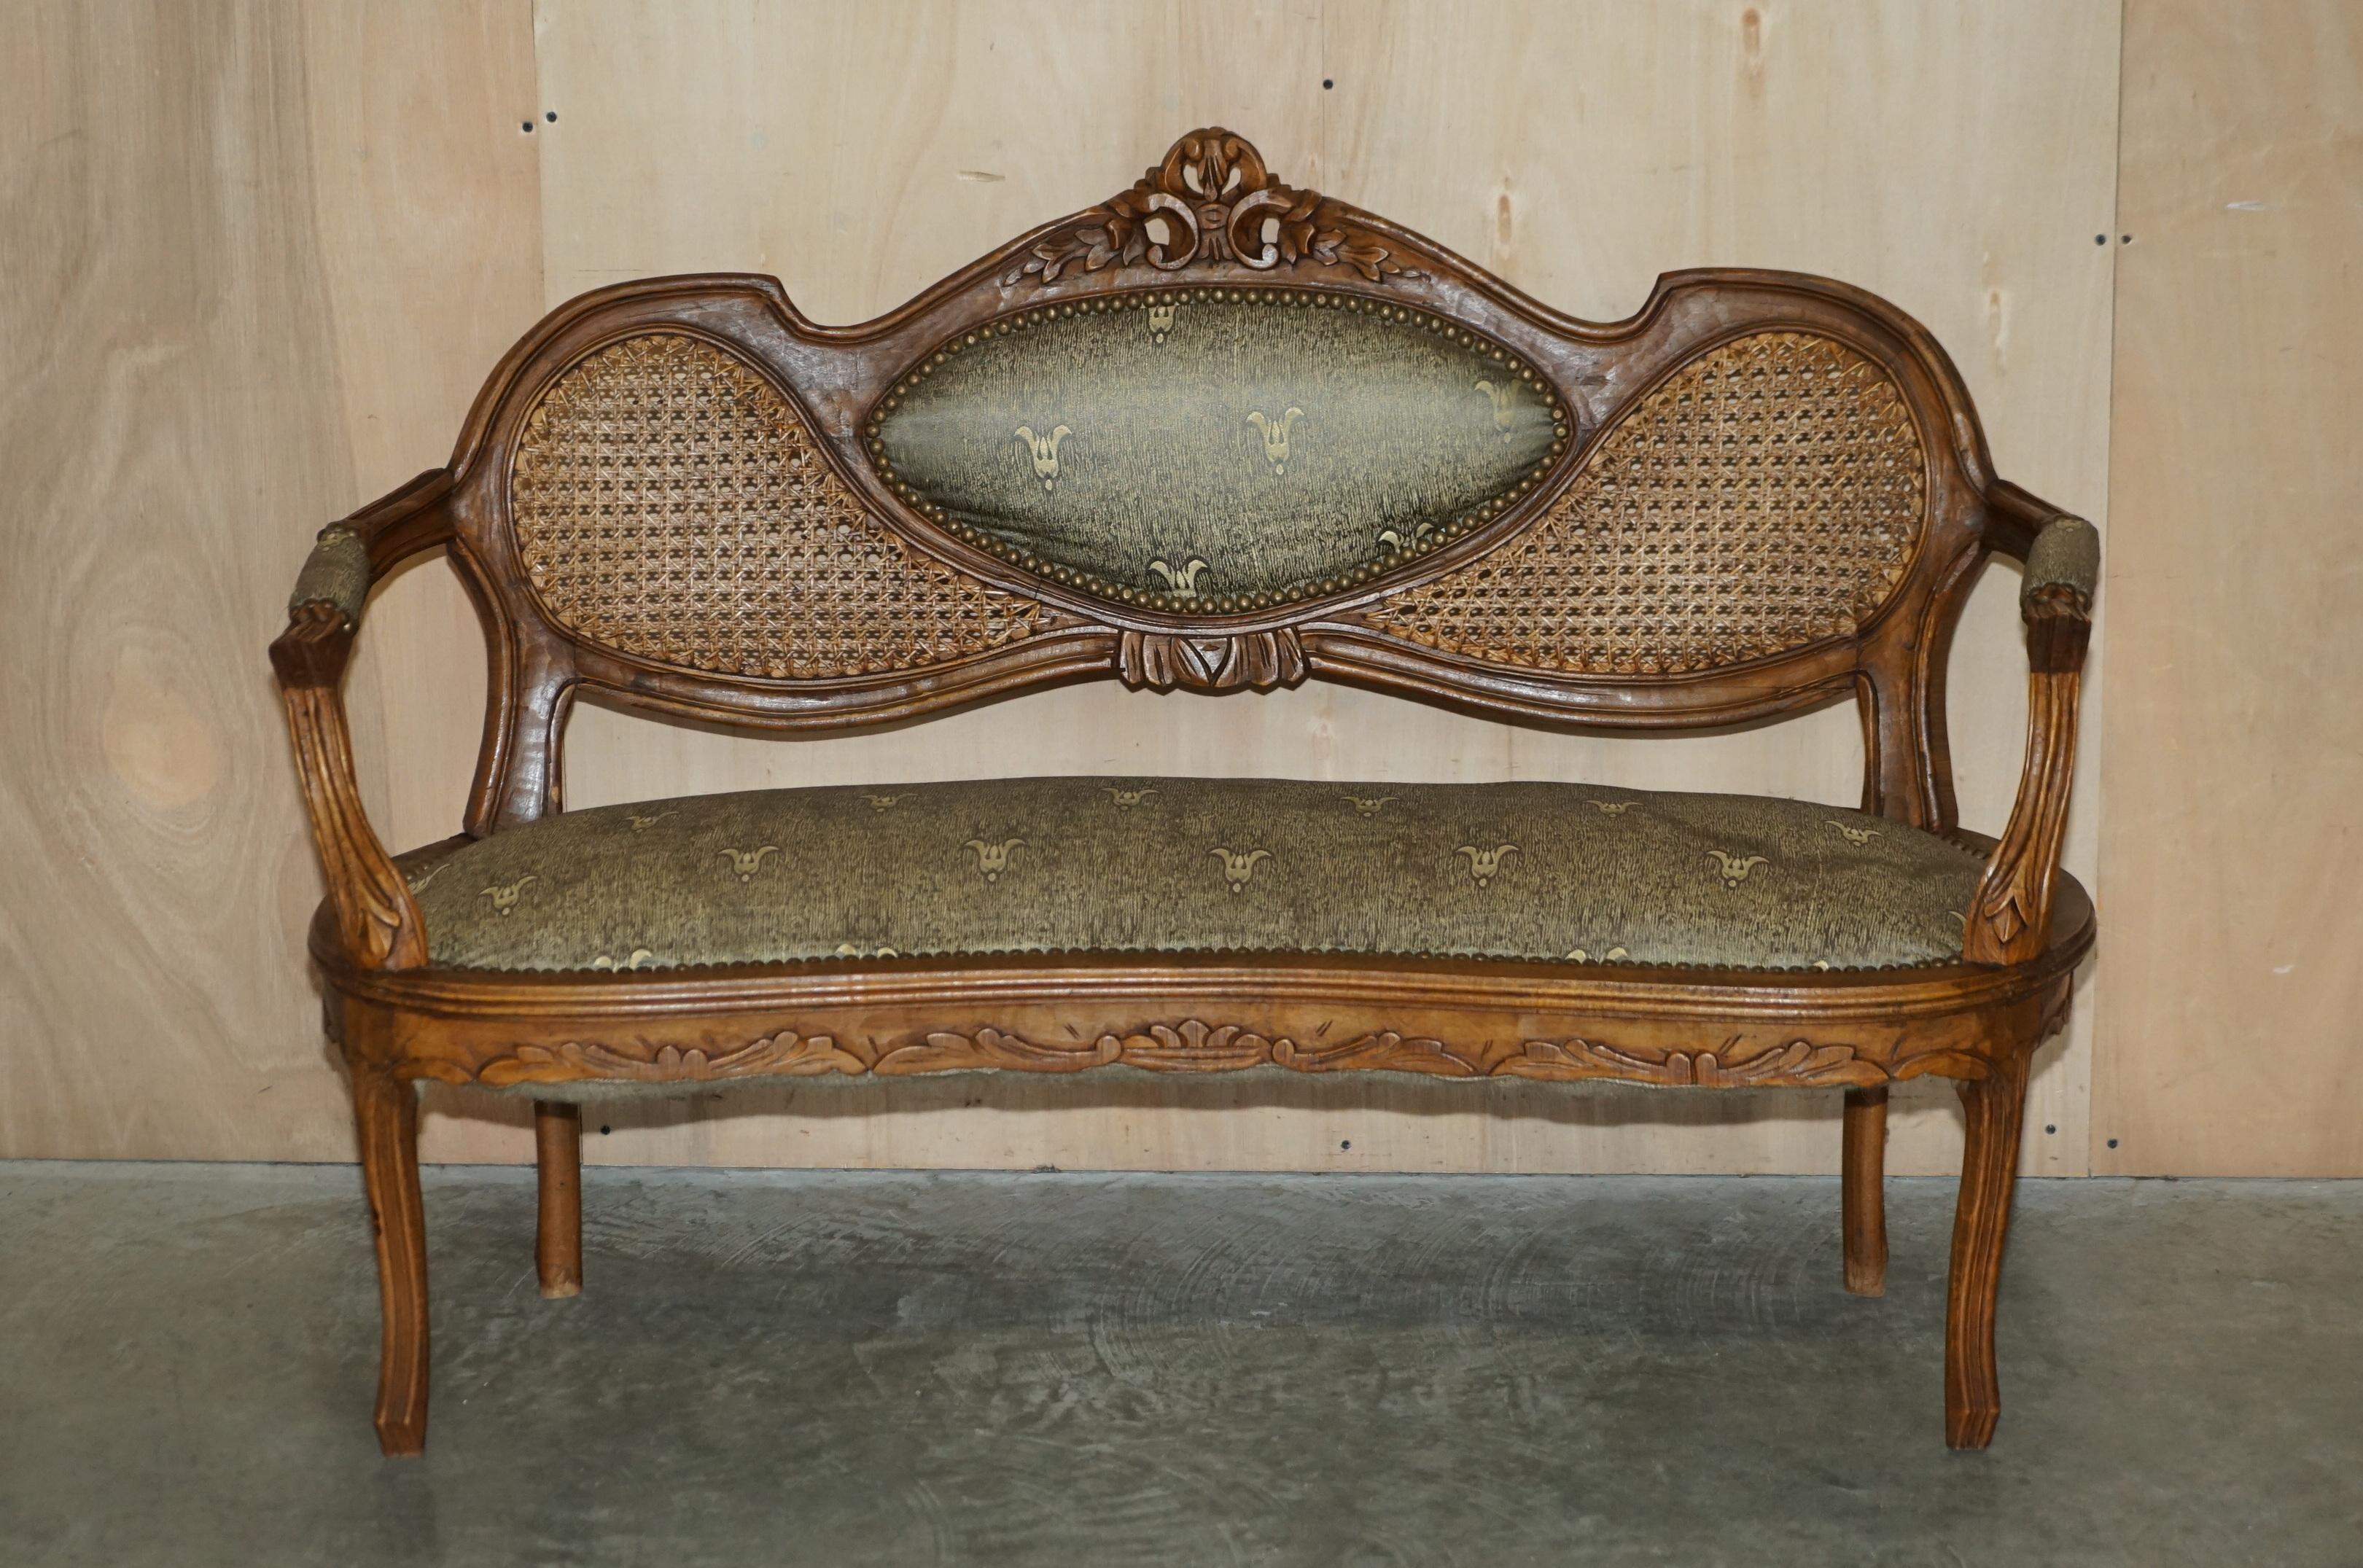 Royal House Antiques

Royal House Antiques is delighted to offer for sale this stunning original circa 1890 Napoleon III Louis XVI style bergère settee which is part of a suite   

Please note the delivery fee listed is just a guide, it covers